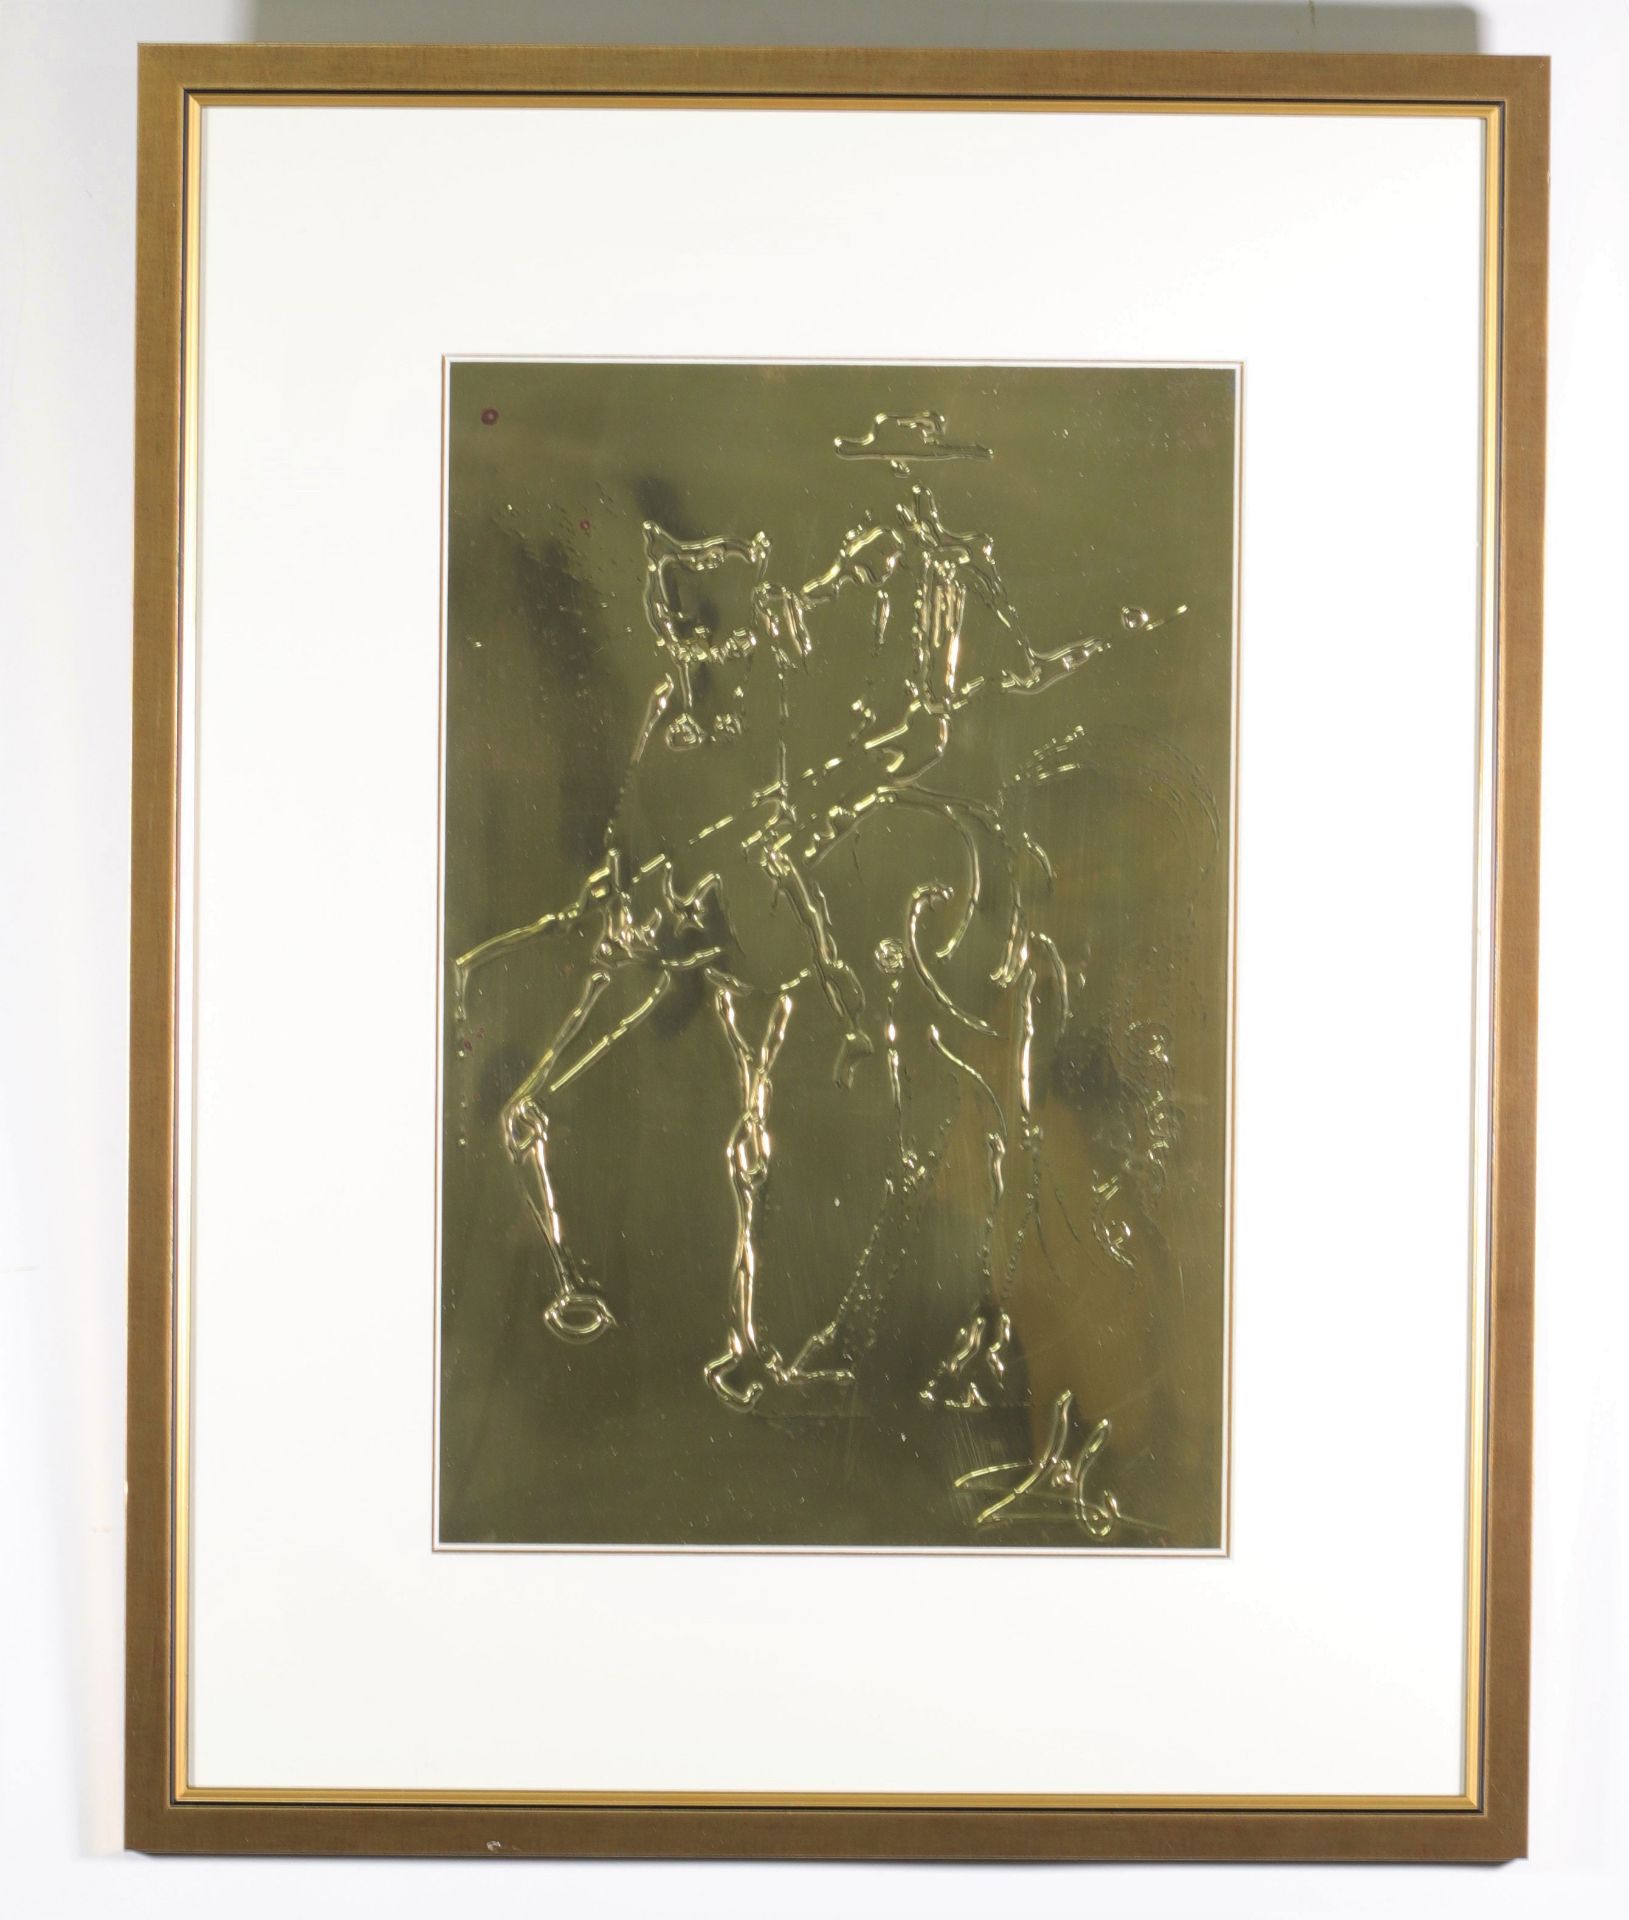 Salvador Dali. "The Picador". 1972. Embossed brass plaque representing a rider on a horse “Dali” sig - Image 2 of 2